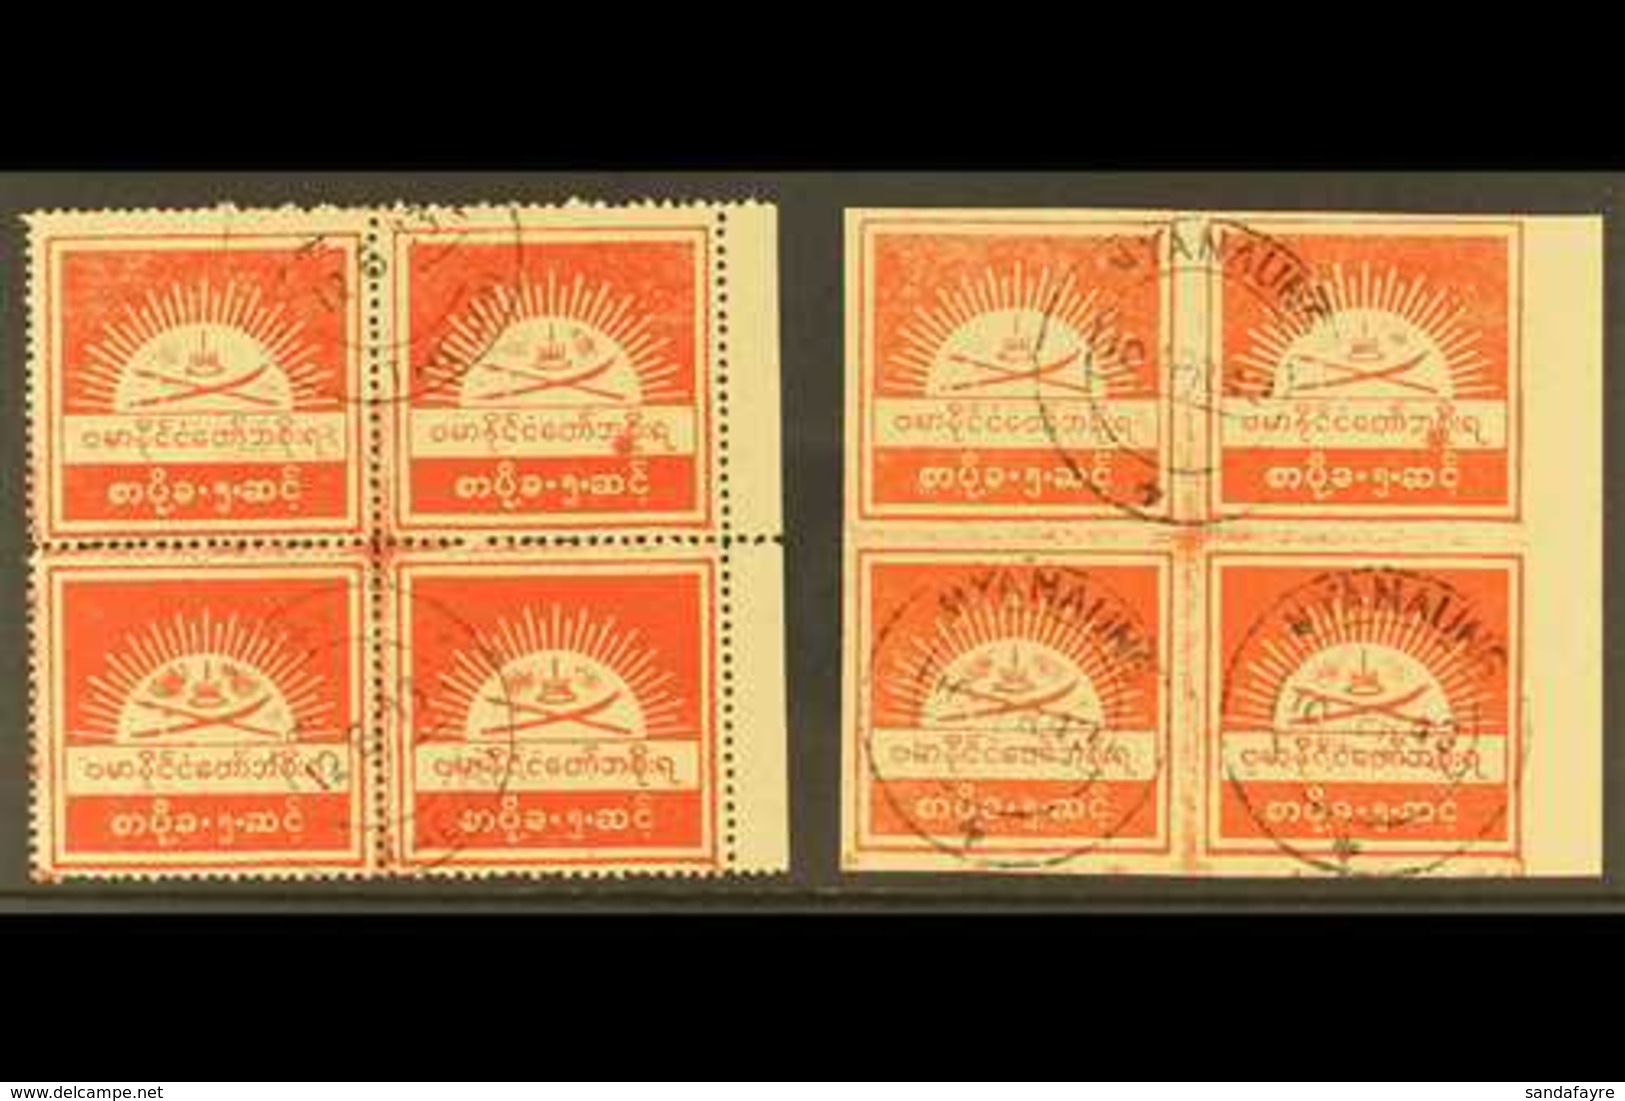 1943 (Feb) 5c Scarlet Burma State Crest Matching PERF & IMPERF. BLOCKS OF FOUR, SG J72/72a, Used. Some Perfs Separating. - Burma (...-1947)